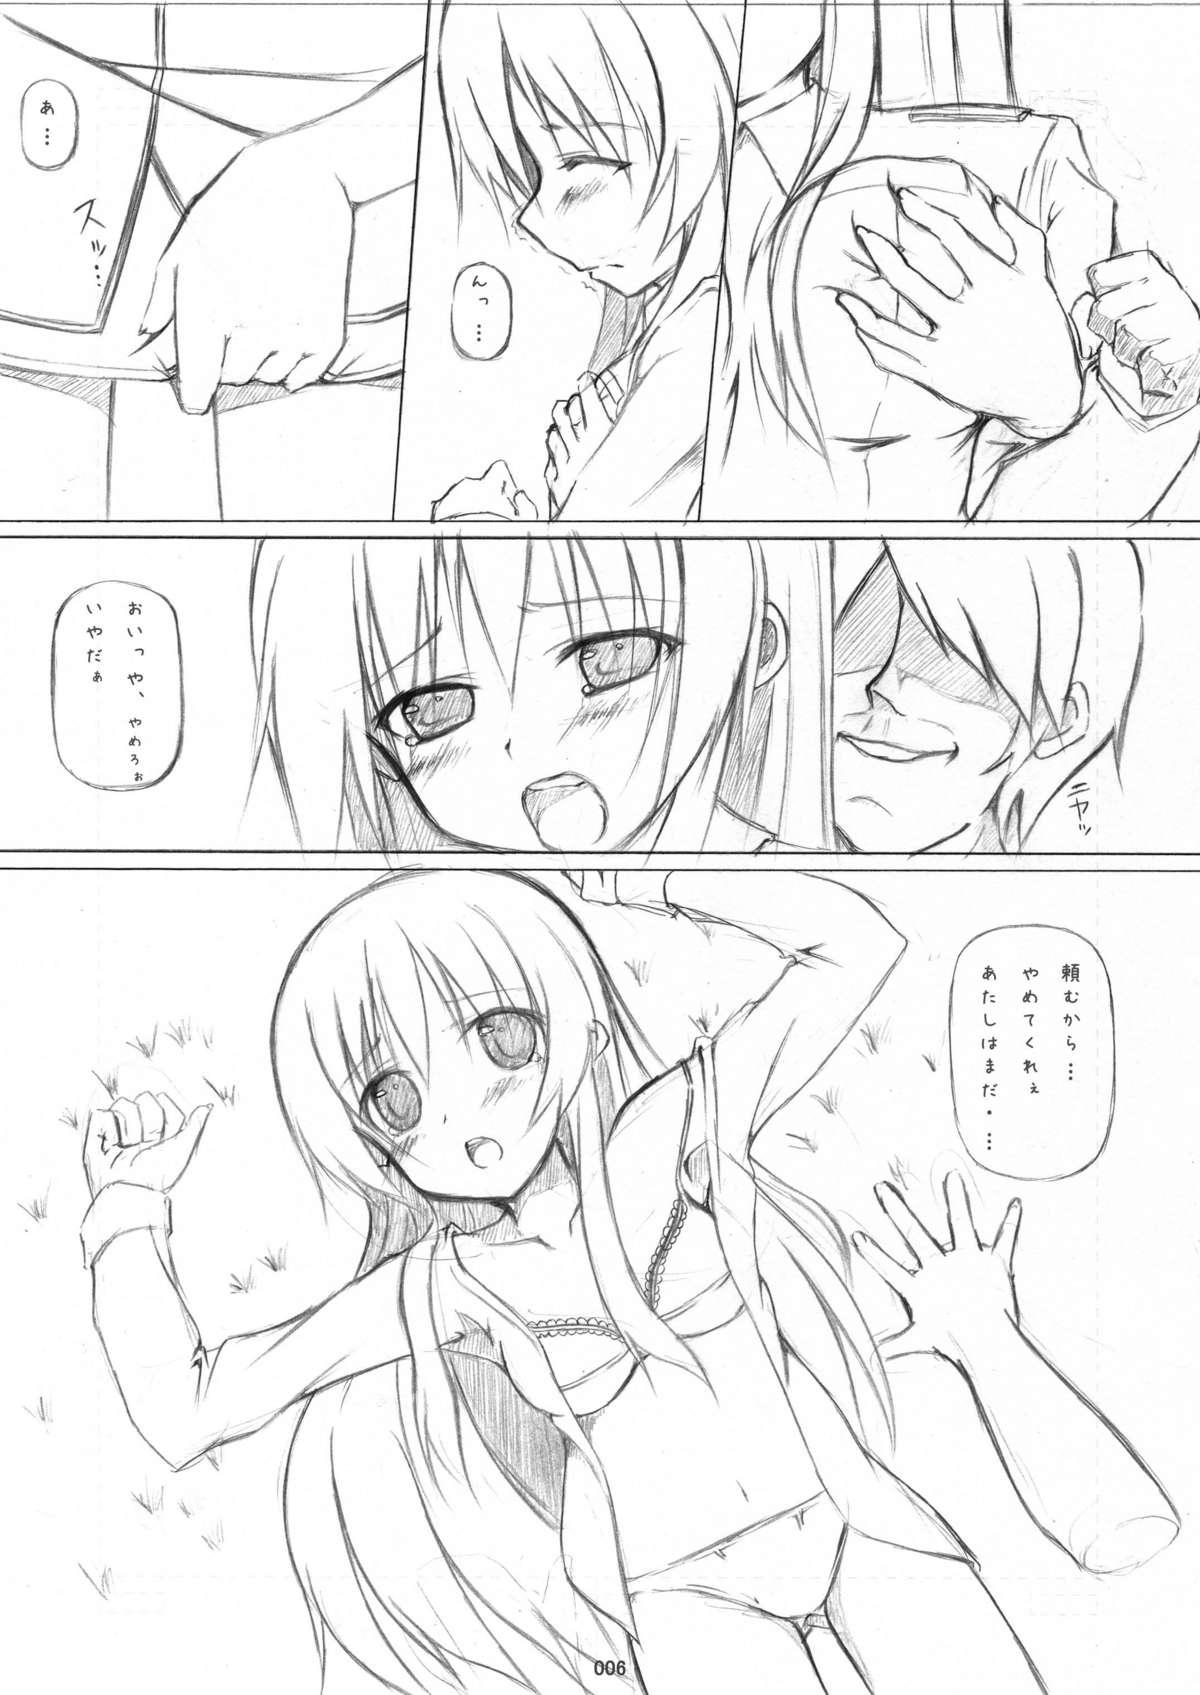 Awesome STRIKE☆ZONE 2 - Strike witches Fake - Page 5